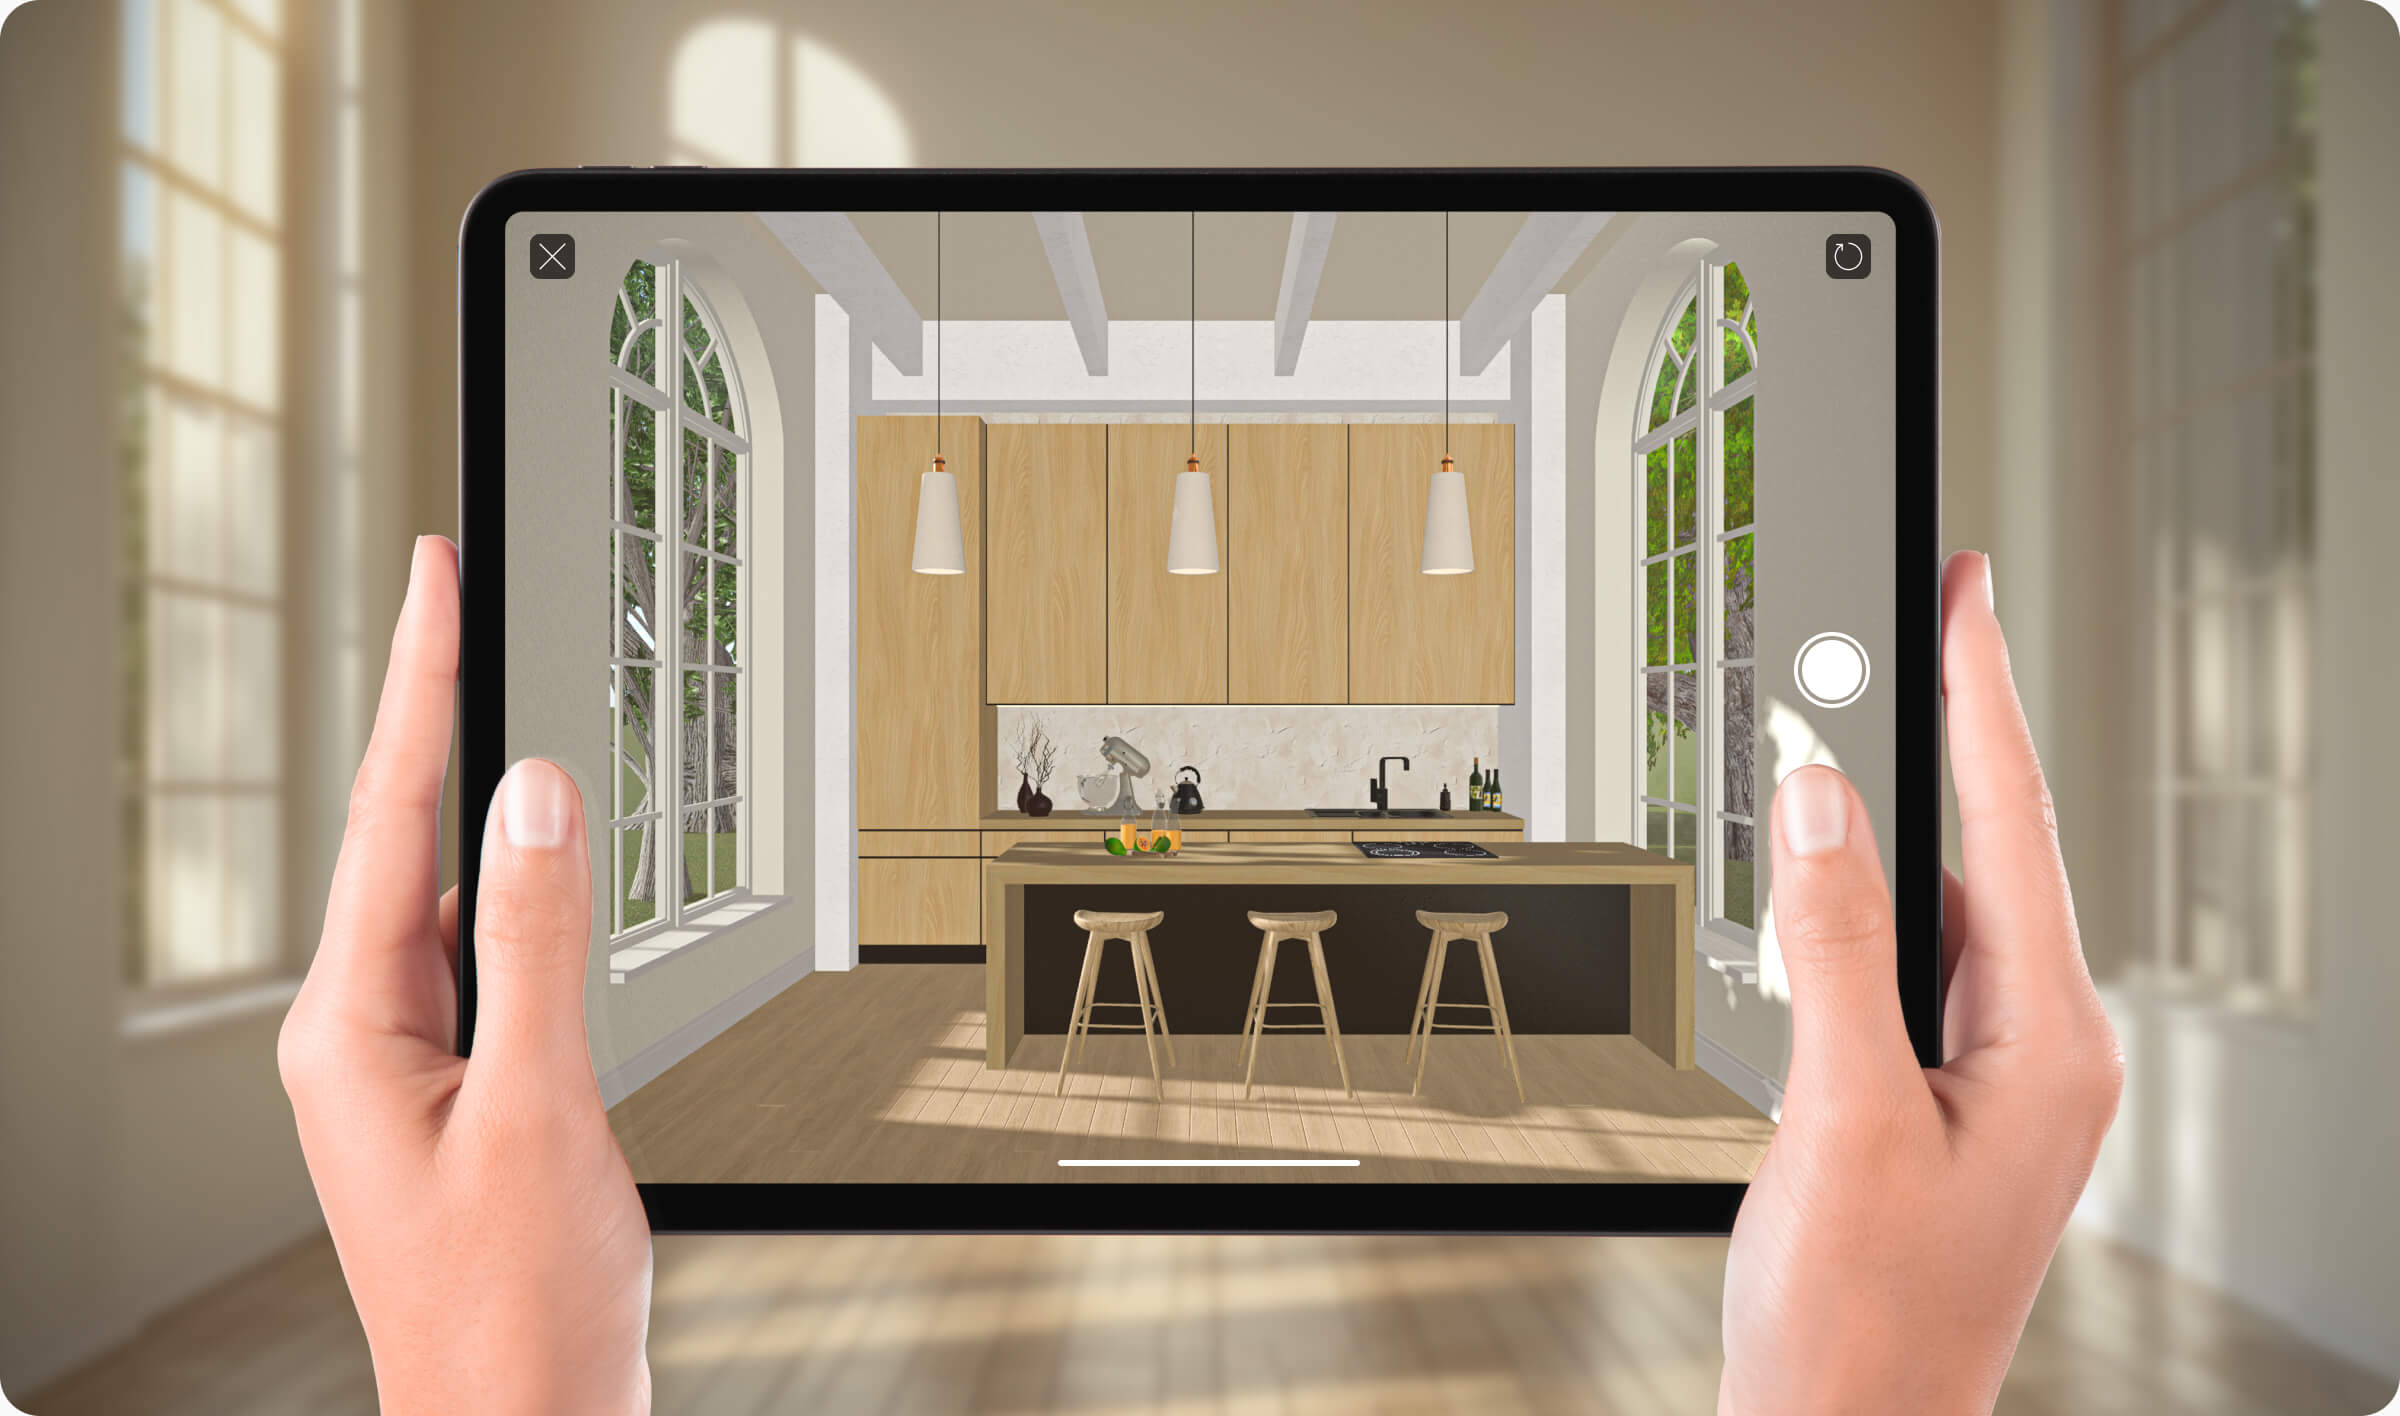 View in AR functionality of Live Home 3D on an iPad demonstrating a kitchen in augmented reality.